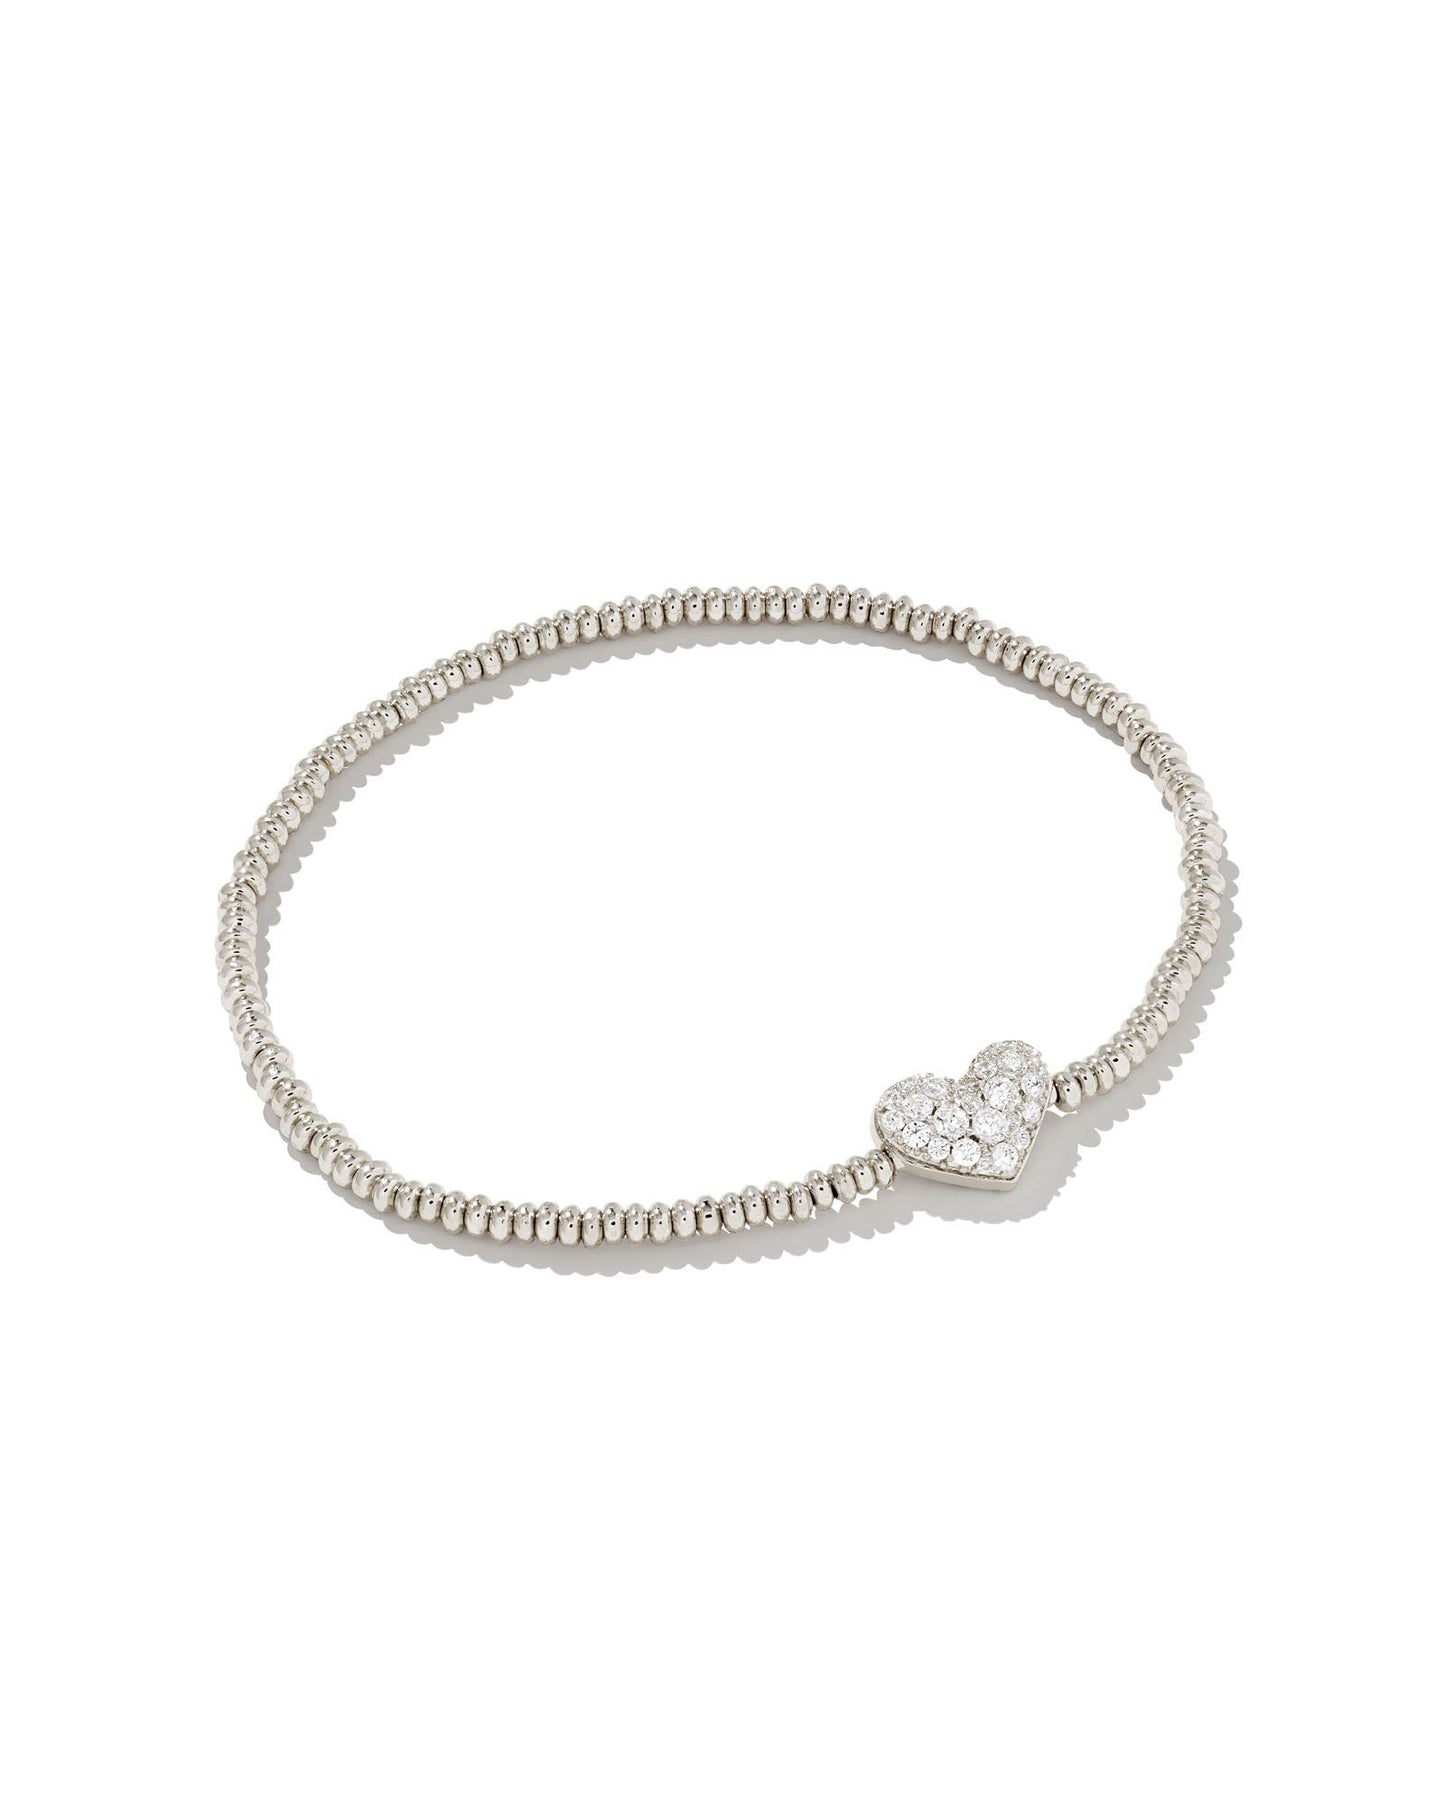 Ari Heart Pave Stretch Bracelet in Silver White Crystal